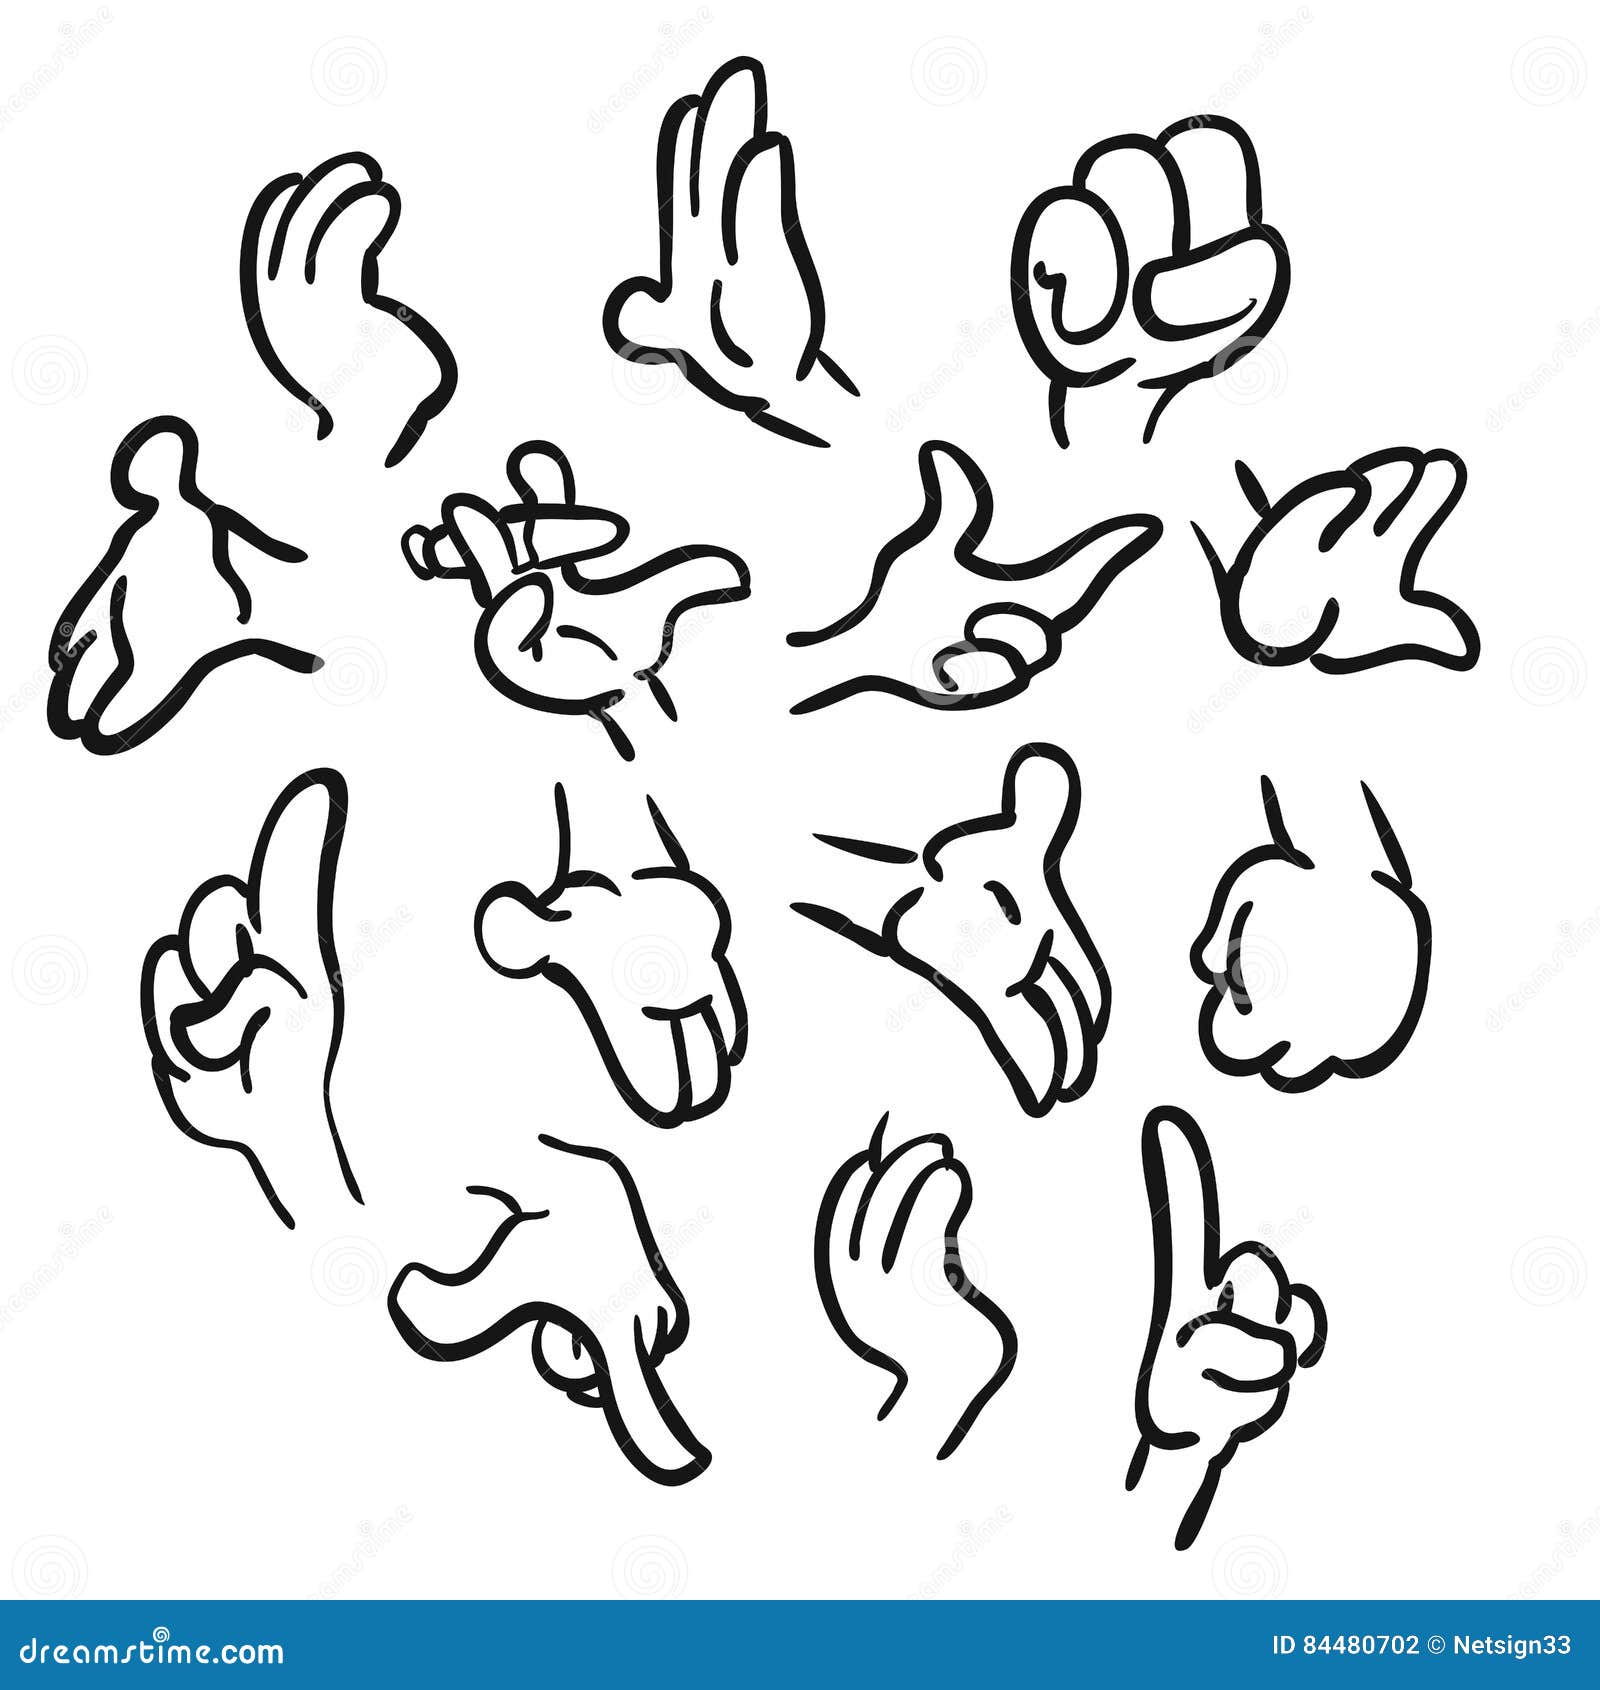 Premium Vector | Hands poses vector set various hand gestures line art  vector illustration isolated on white